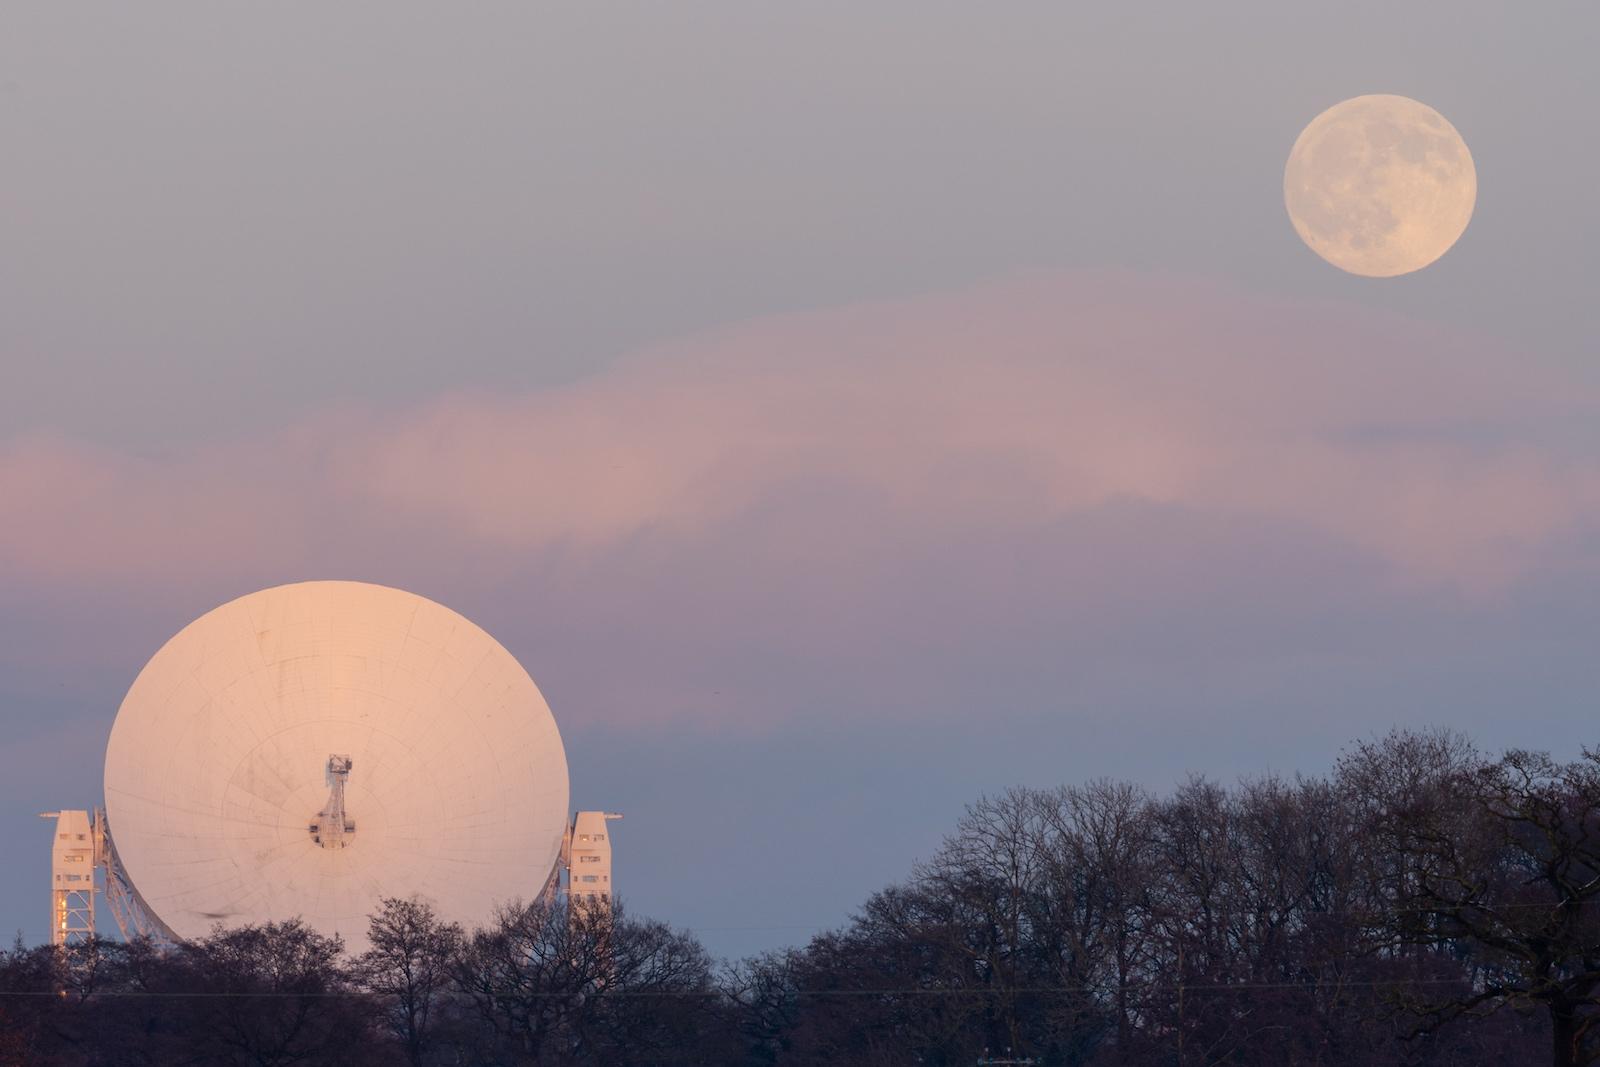 It was the photographer’s long-held ambition to capture the Moon and the famous Lovell Telescope at maximum focal length, which for the photographer is 400mm. Finding a spot with a clear view, far enough away from the subject, and the Moon being in the sky at the correct time of day was all part of the puzzle. By the time the Moon appeared, the photographer had to drop down the focal length to 286mm to compose this image. The setting Sun did however light up the clouds for some lovely colours.